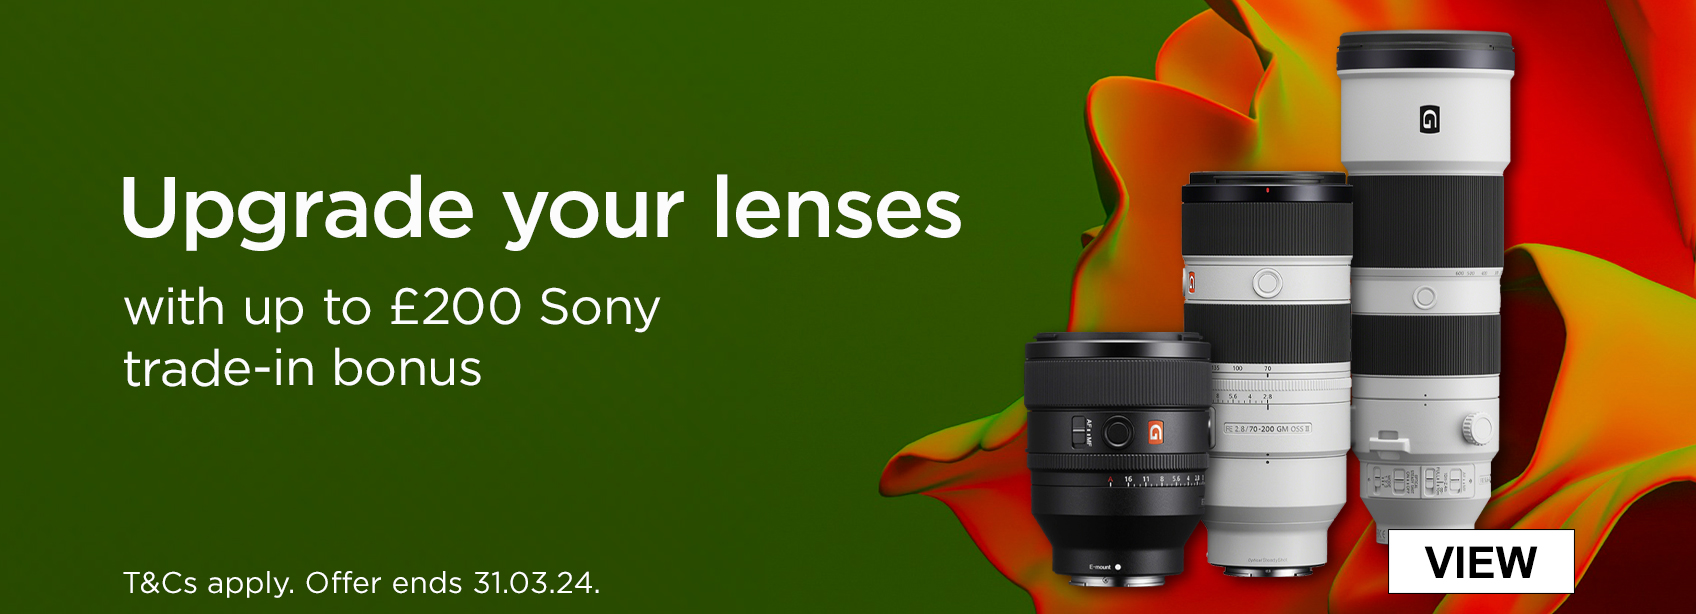 Upgrade your lenses with up to £200 trade-in bonus. T&C's apply. Offer ends 31.03.24